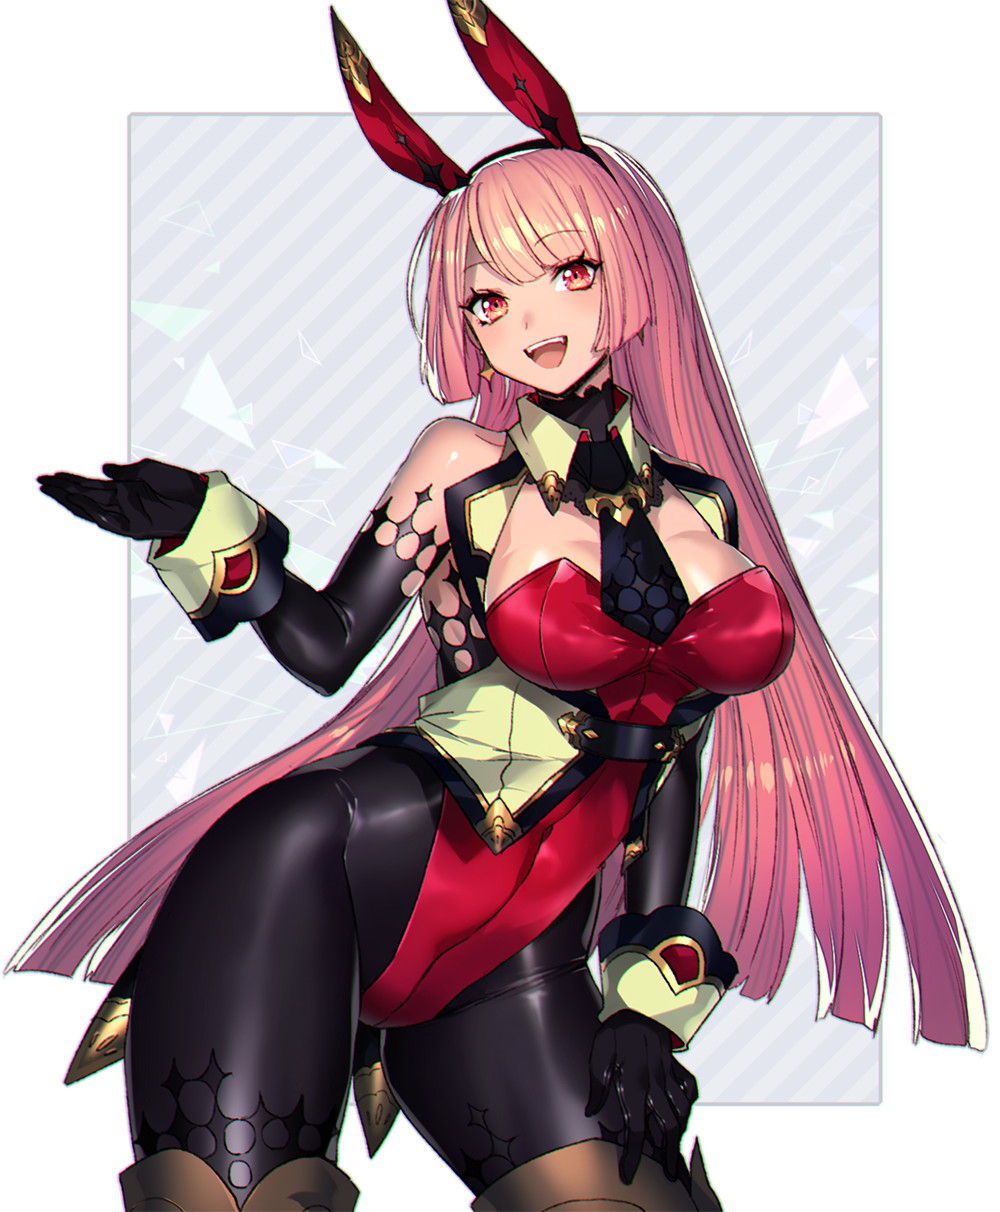 Please click here for the gentleman who likes the image of Bunny Girl. 6